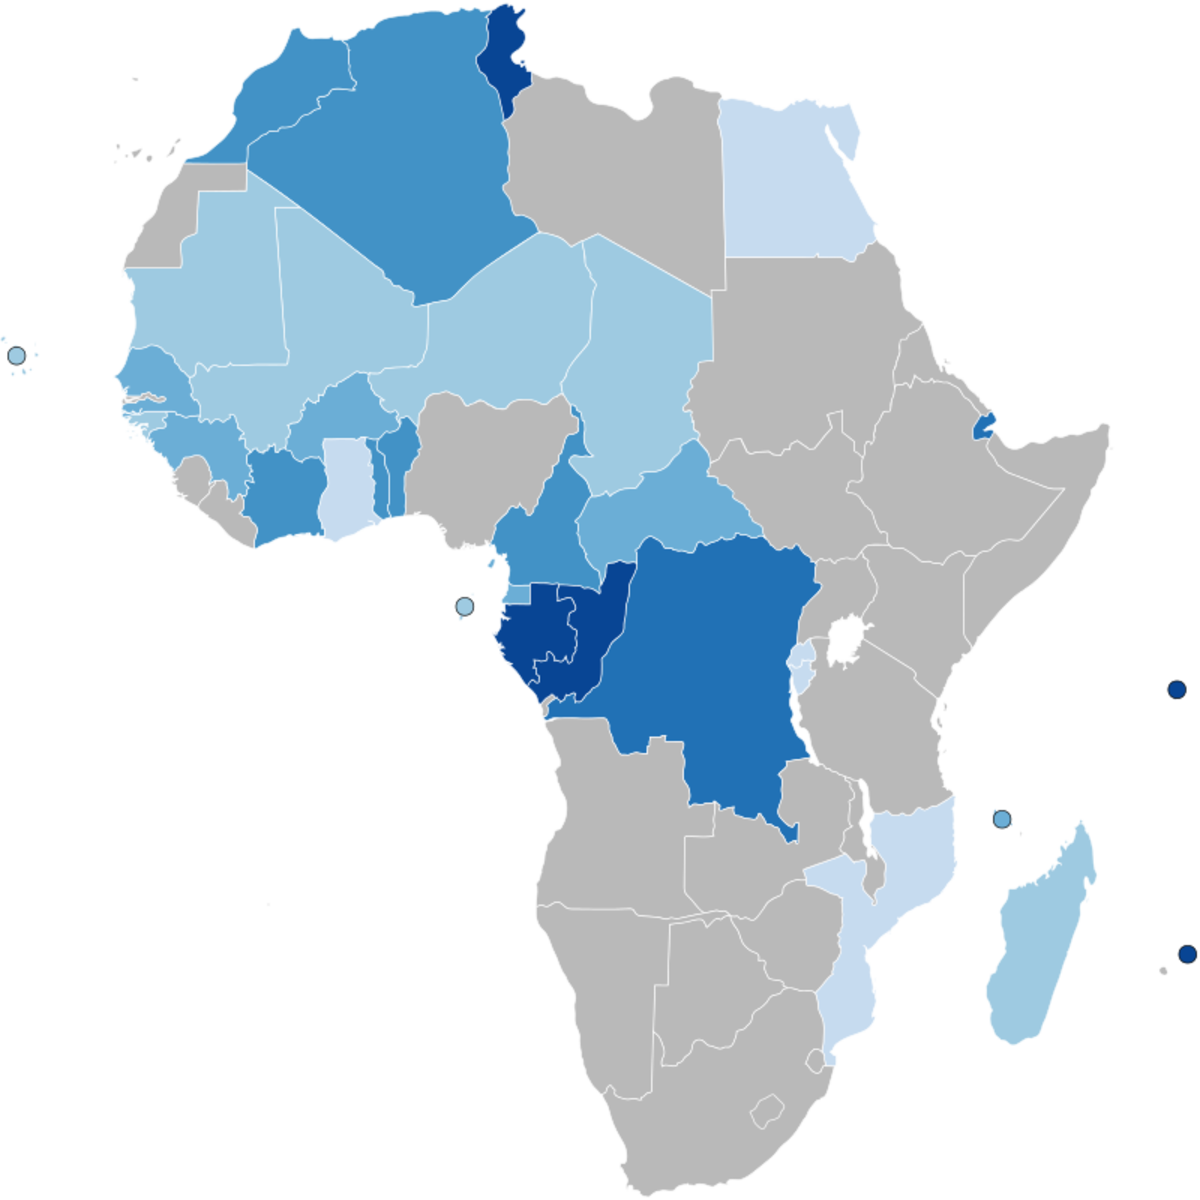 A map of Africa with the percentage of the population speaking French.  Lightest blue = 0-10% french Very light blue = 11-20% french Light blue = 21-30% french Blue = 31-40% french Dark blue = 41-50% french Darkest blue = 50% frech